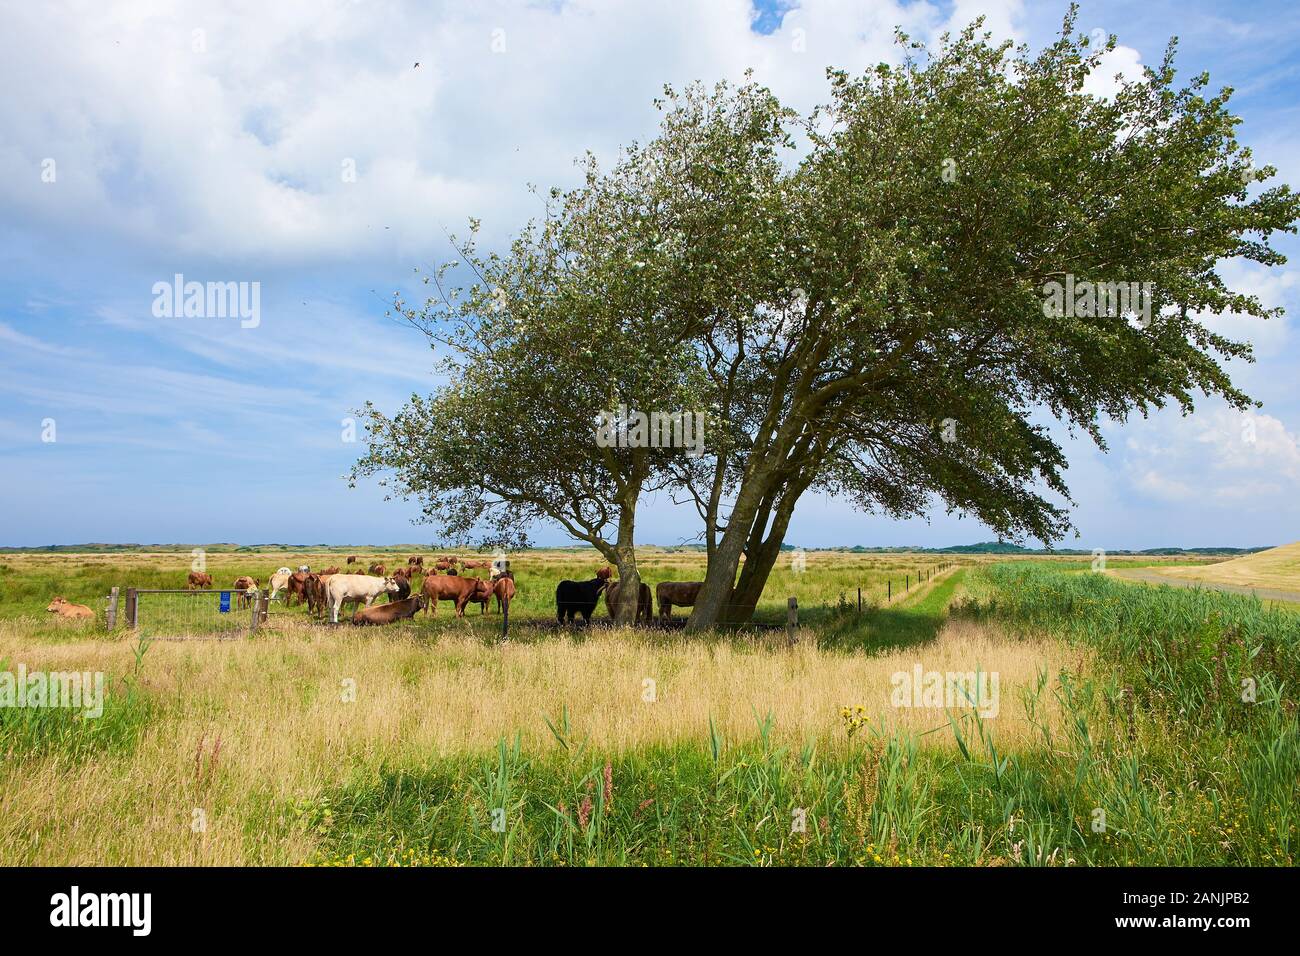 Landscape with a windswept birch tree and a herd of cows in a grassy field Stock Photo